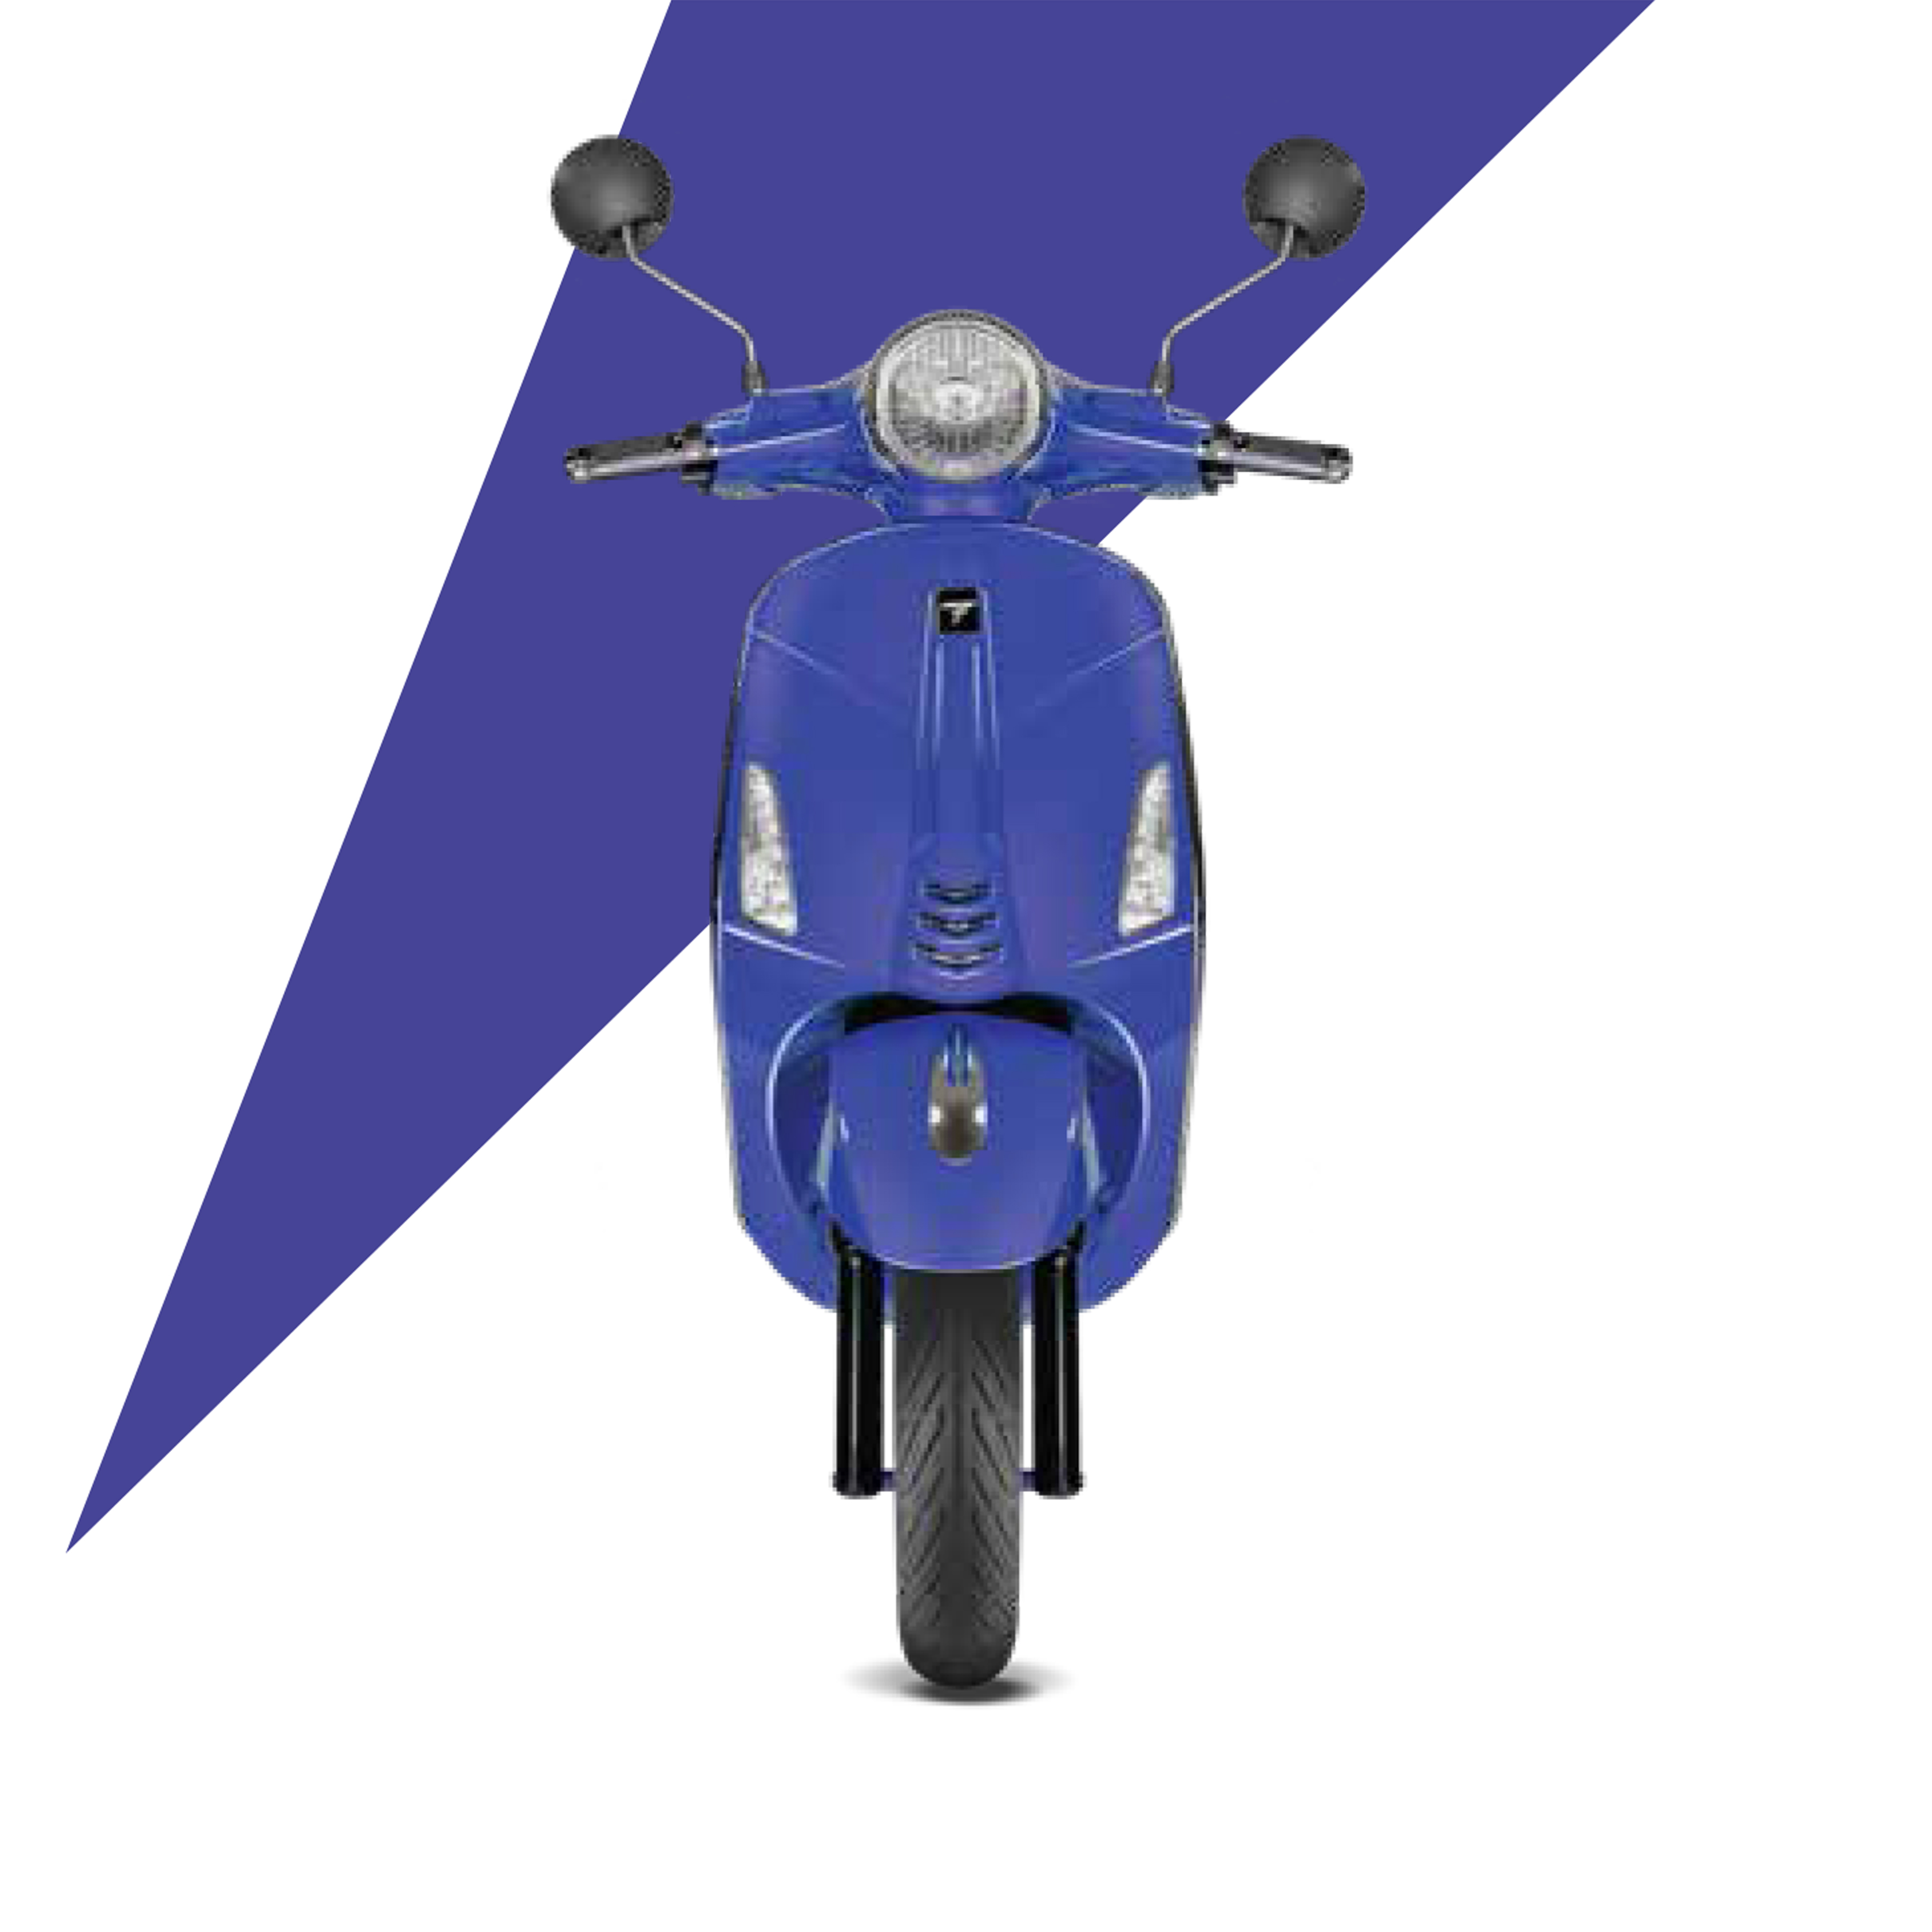 Pure EV Epluto 7G Electric Scooter - Blue